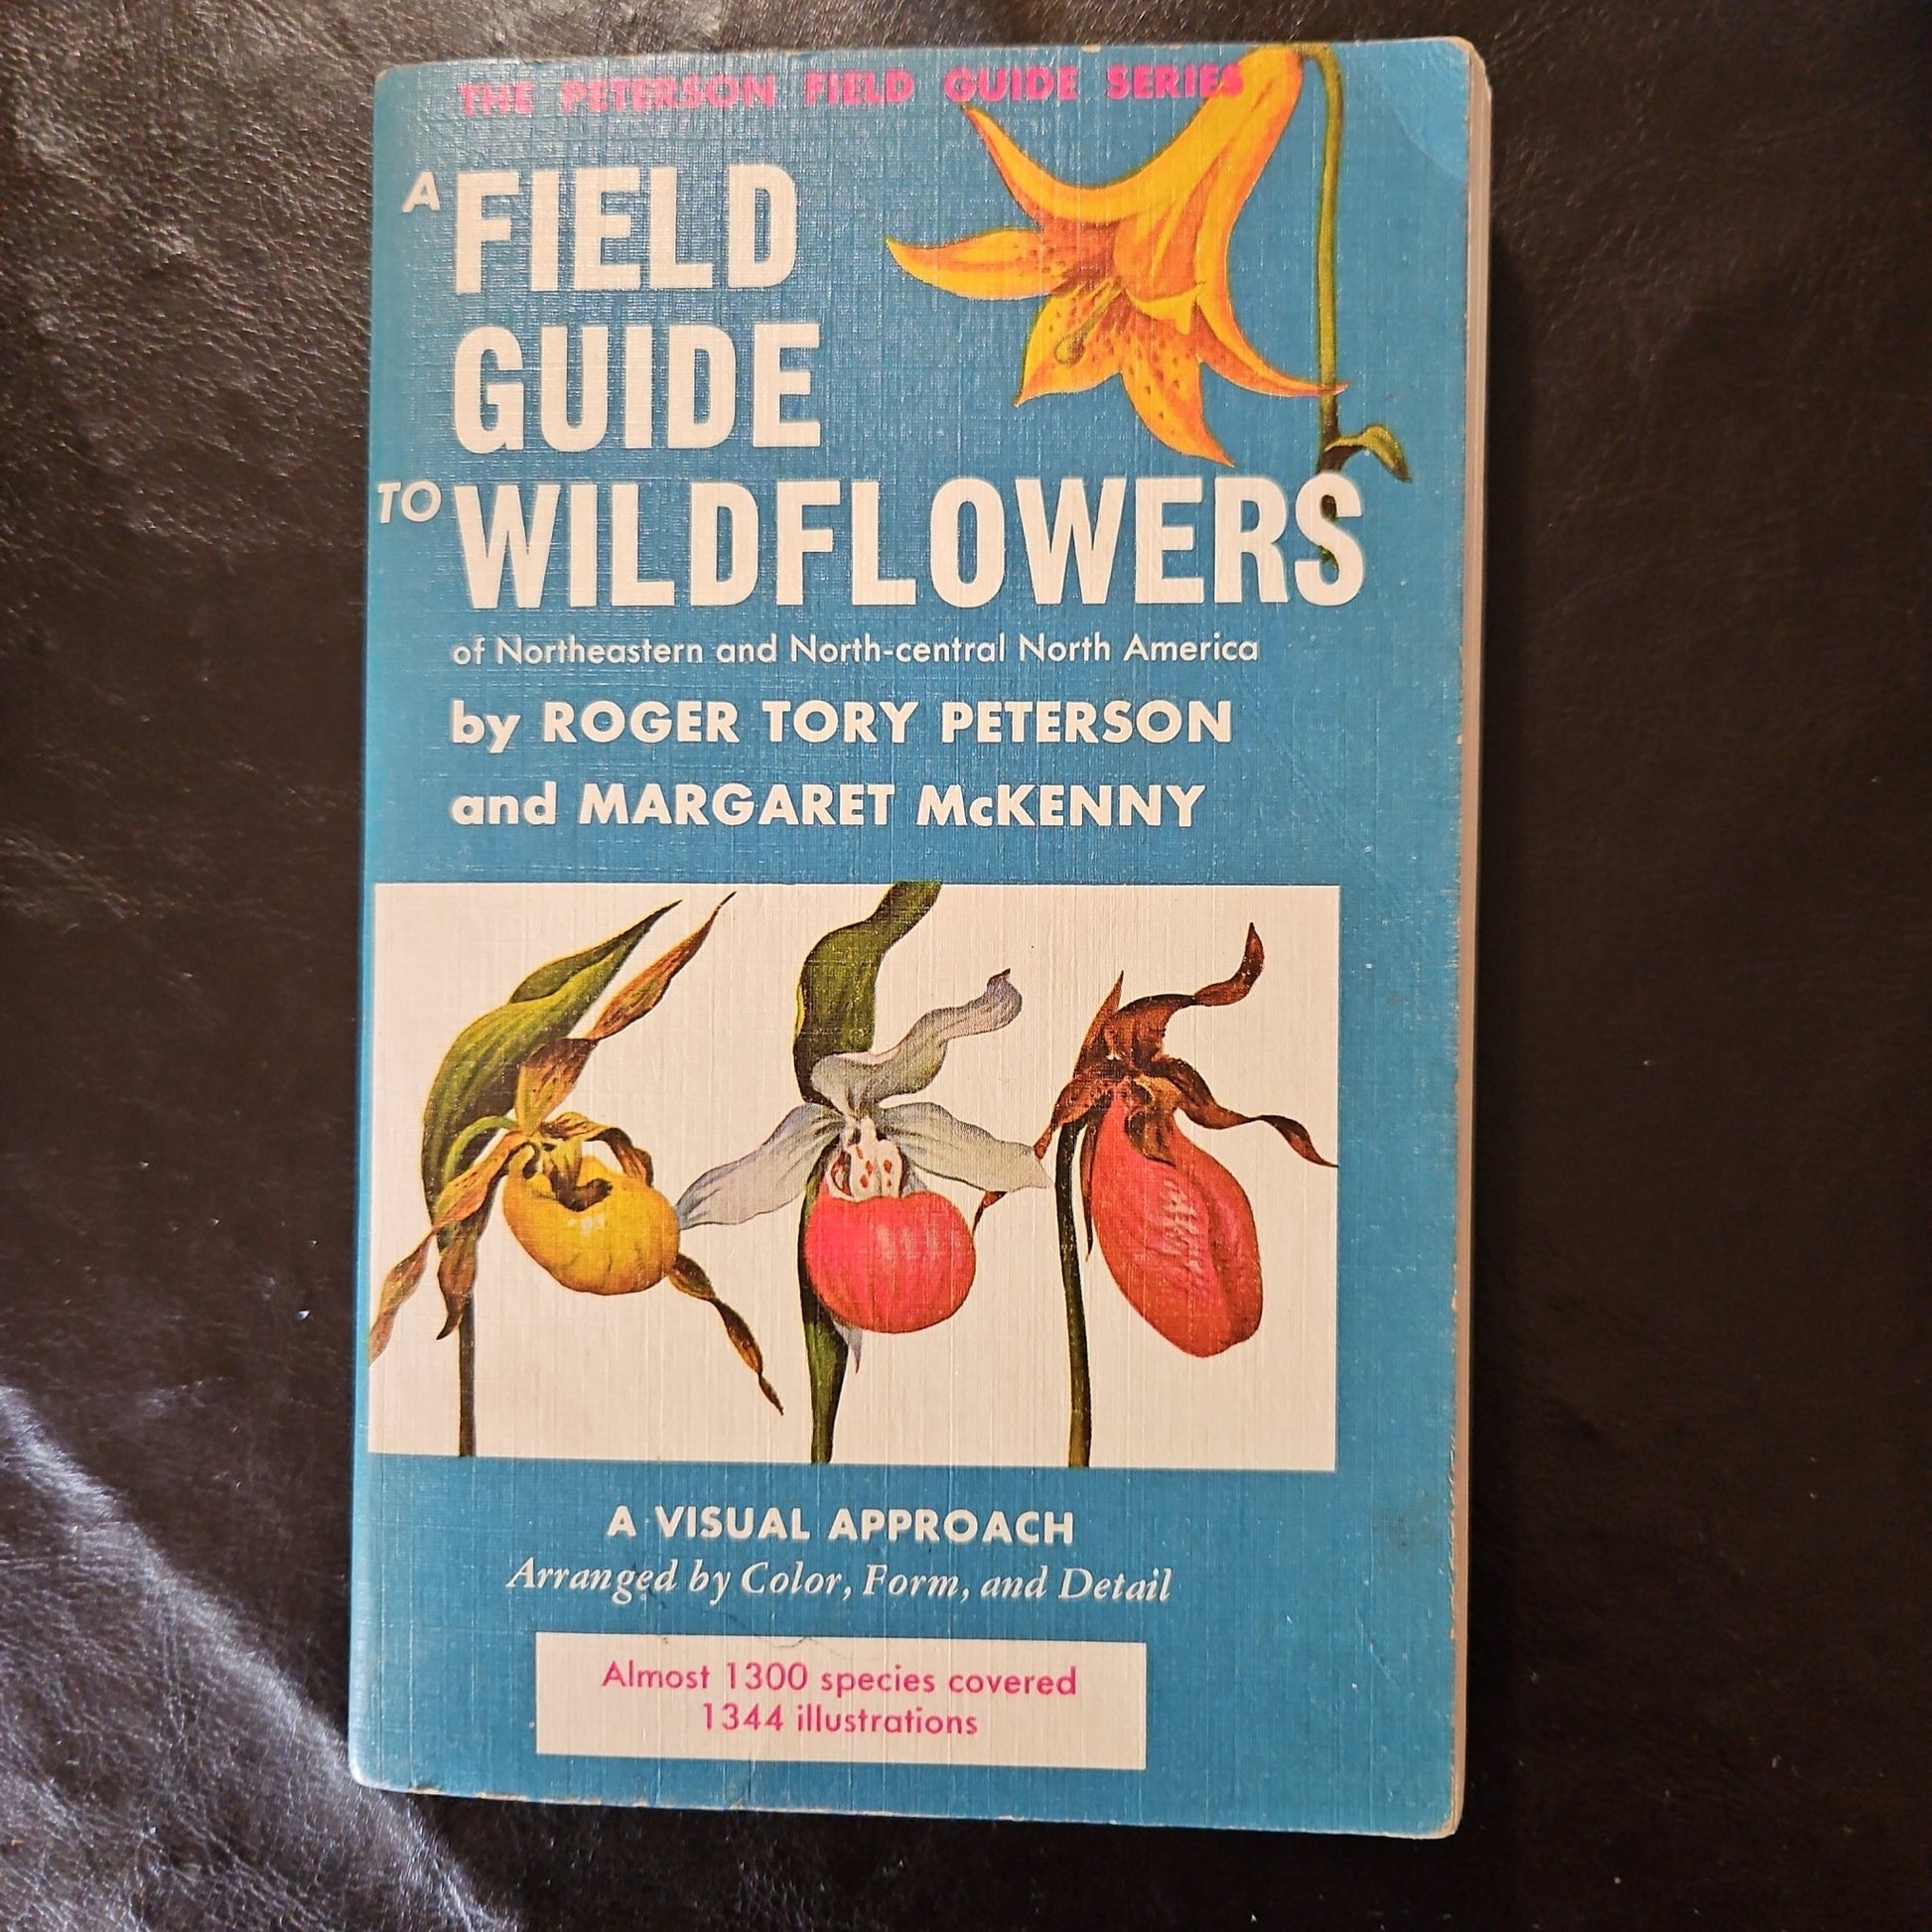 A Foeld Guide to Wildflowers - [ash-ling] Booksellers